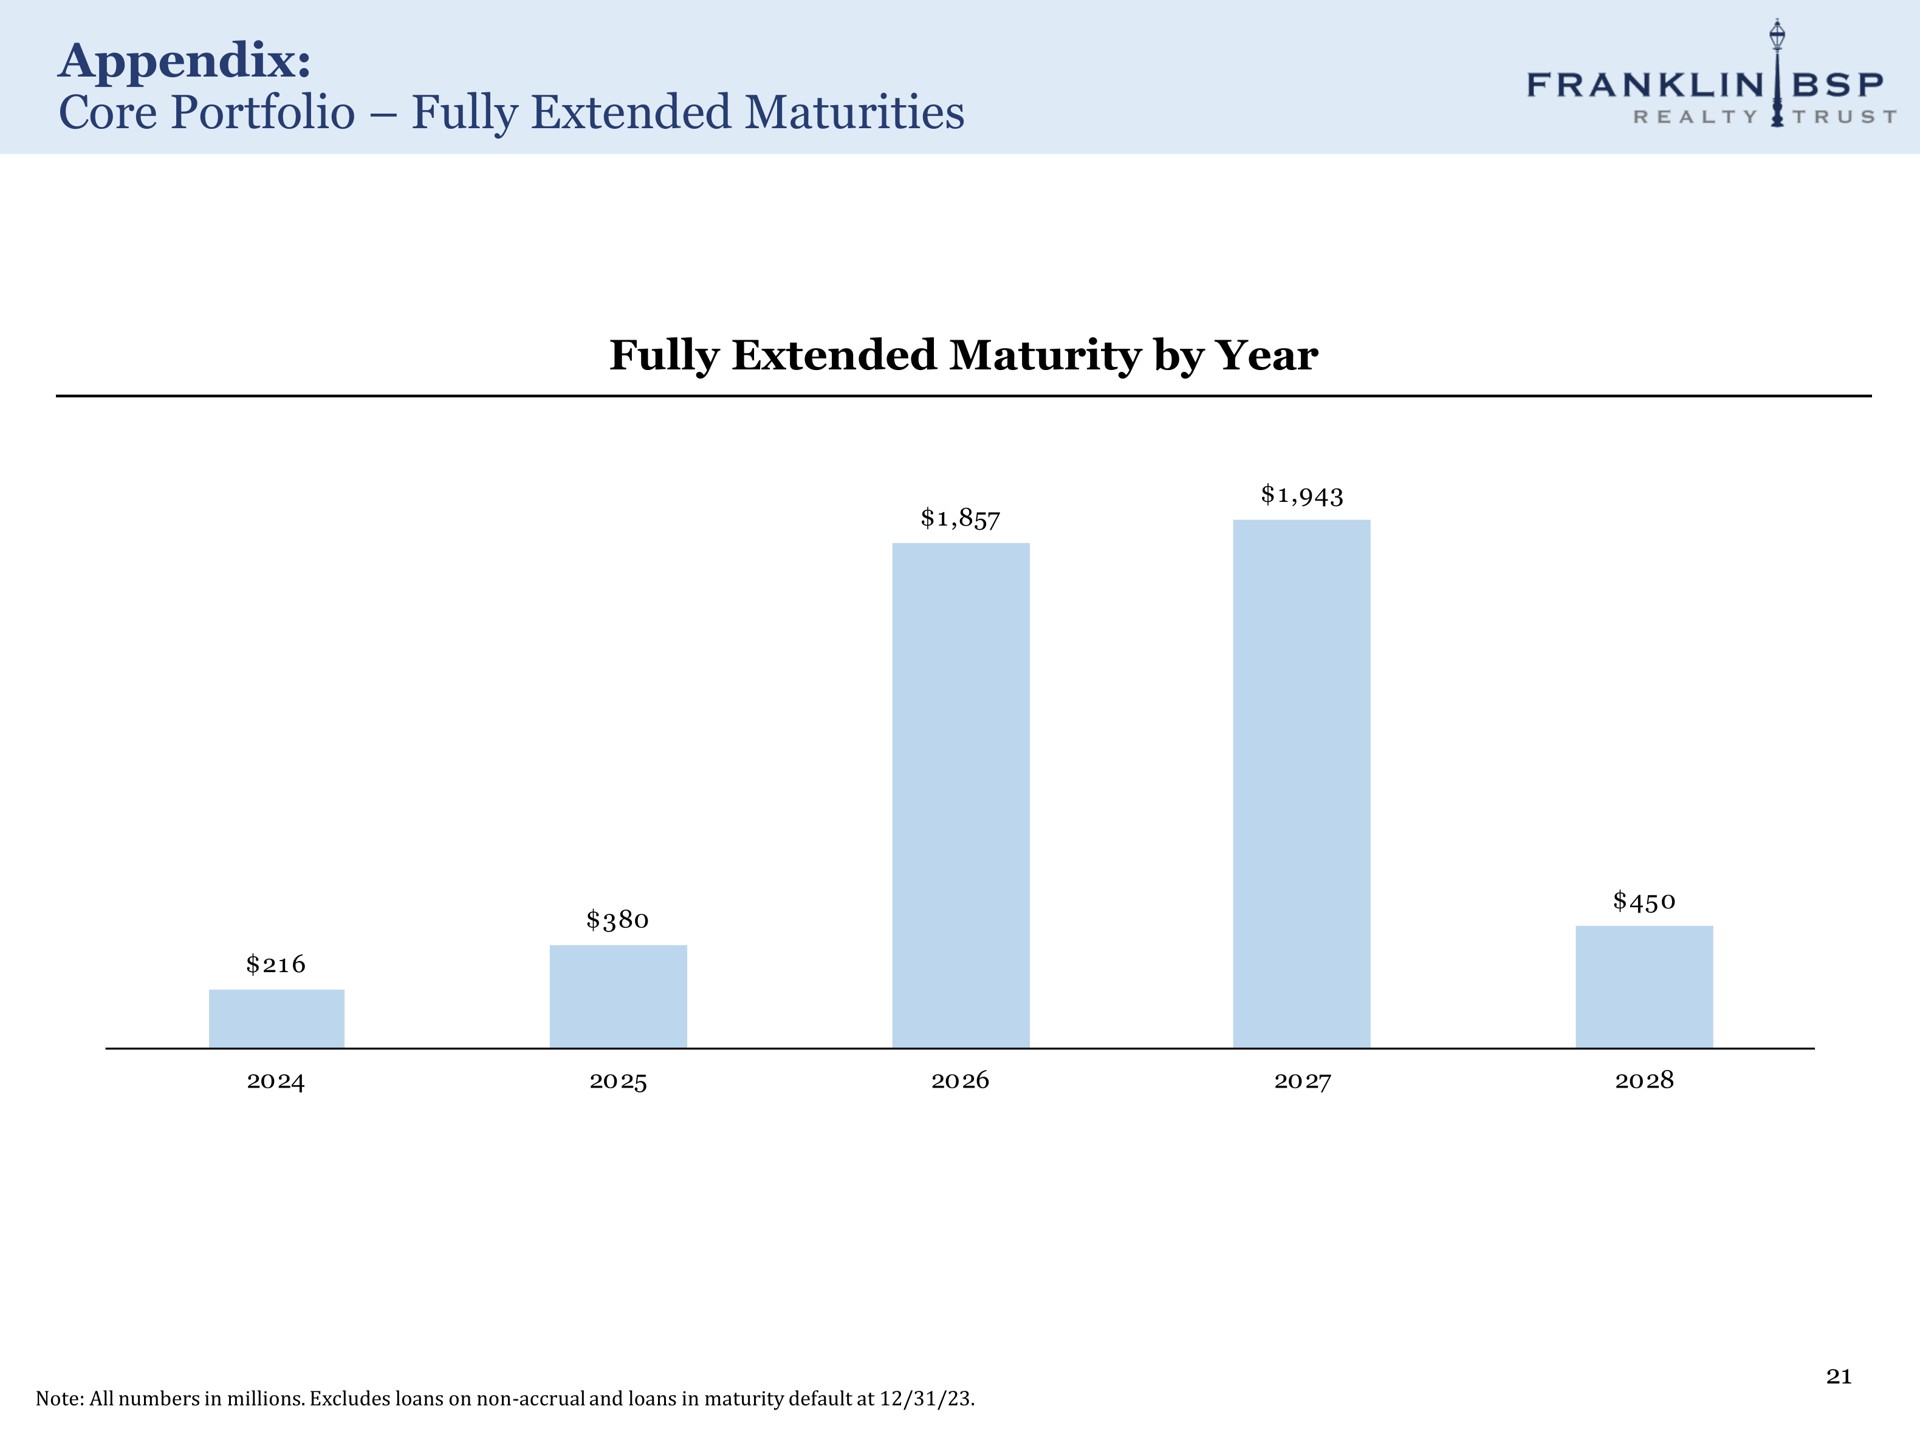 appendix core portfolio fully extended maturities fully extended maturity by year franklin realty rust | Franklin BSP Realty Trust